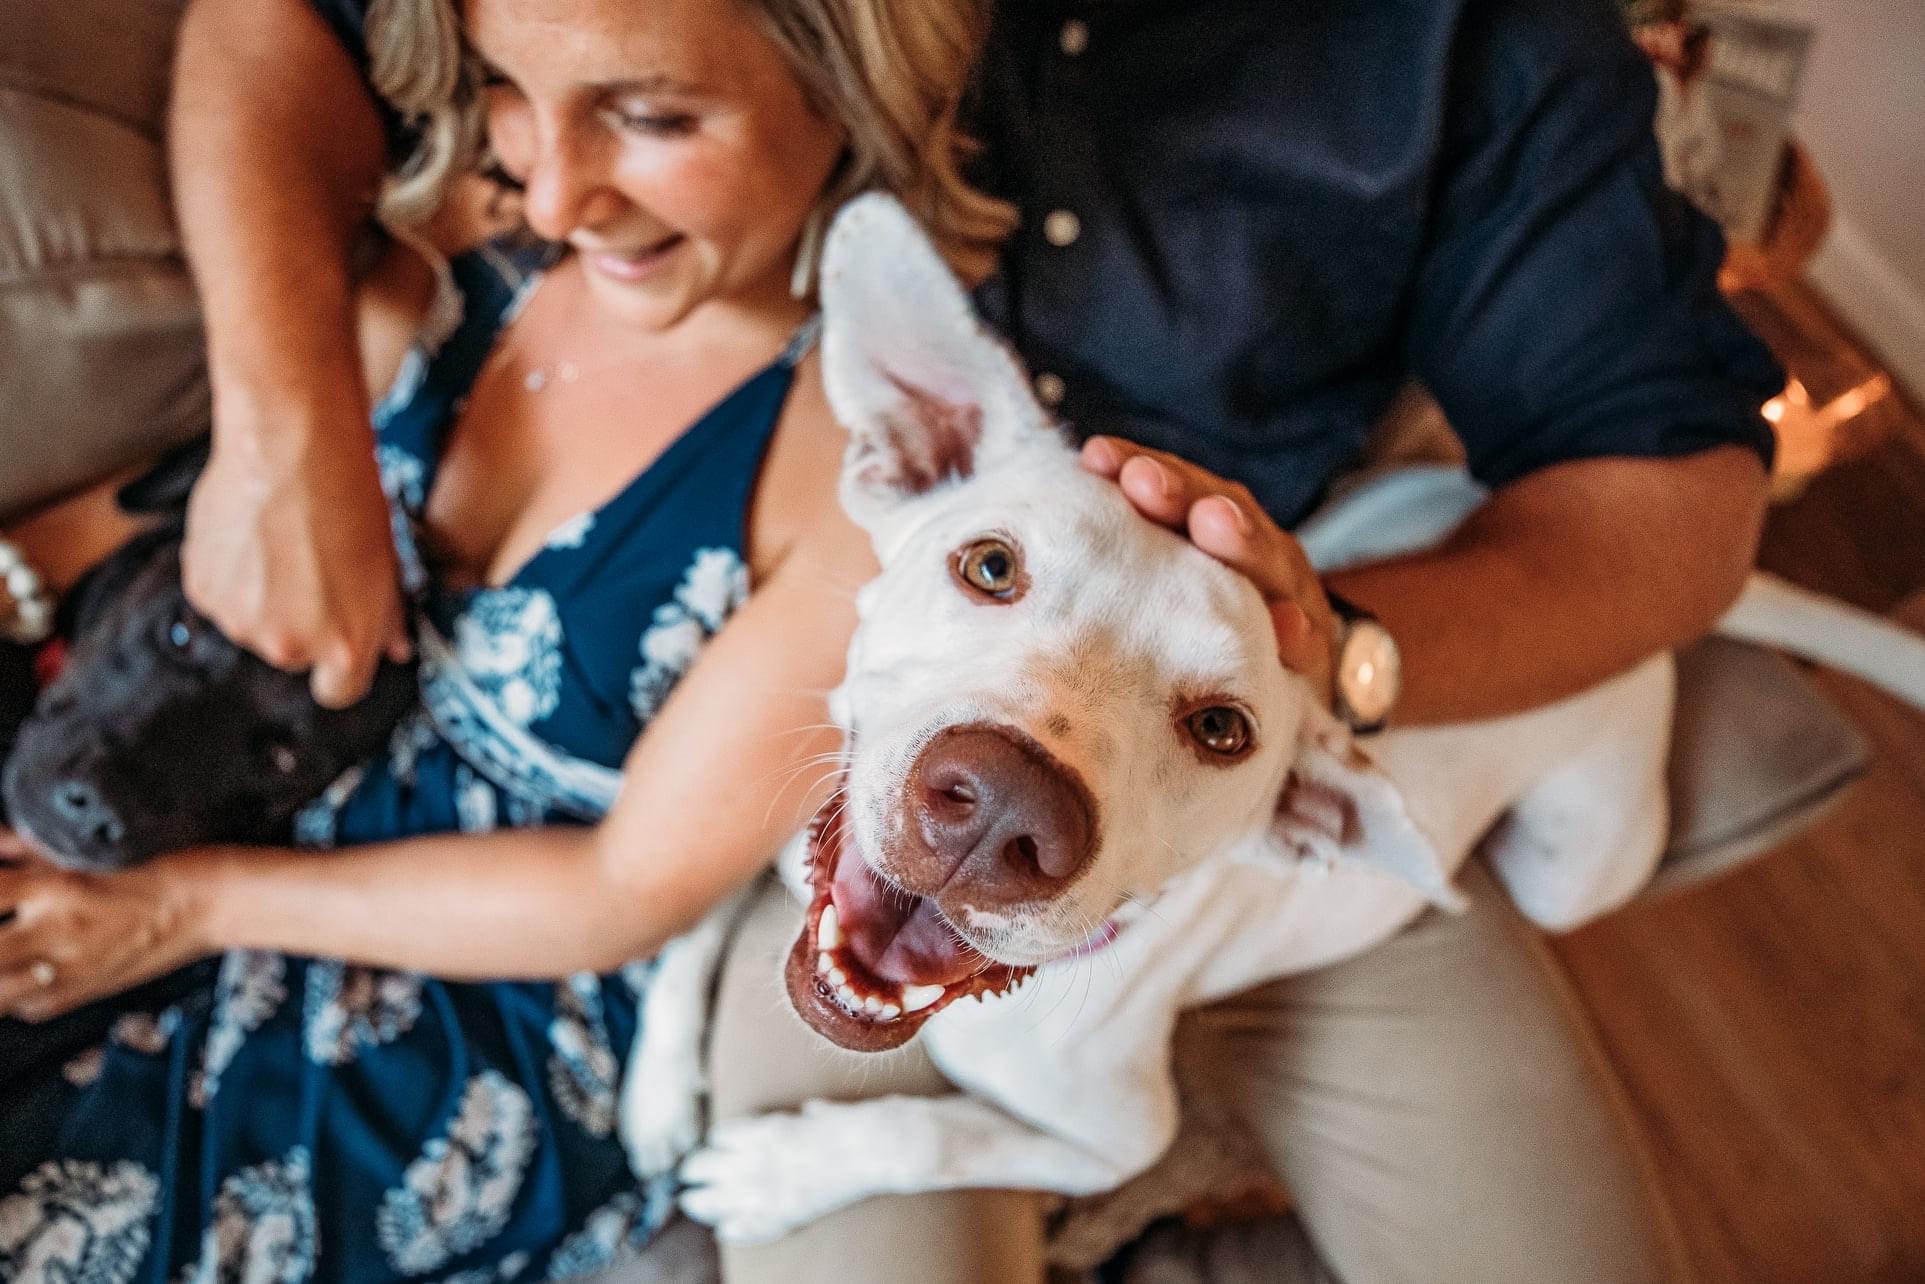 "Mom and dad did an engagement shoot, but I was the real star of the show..."